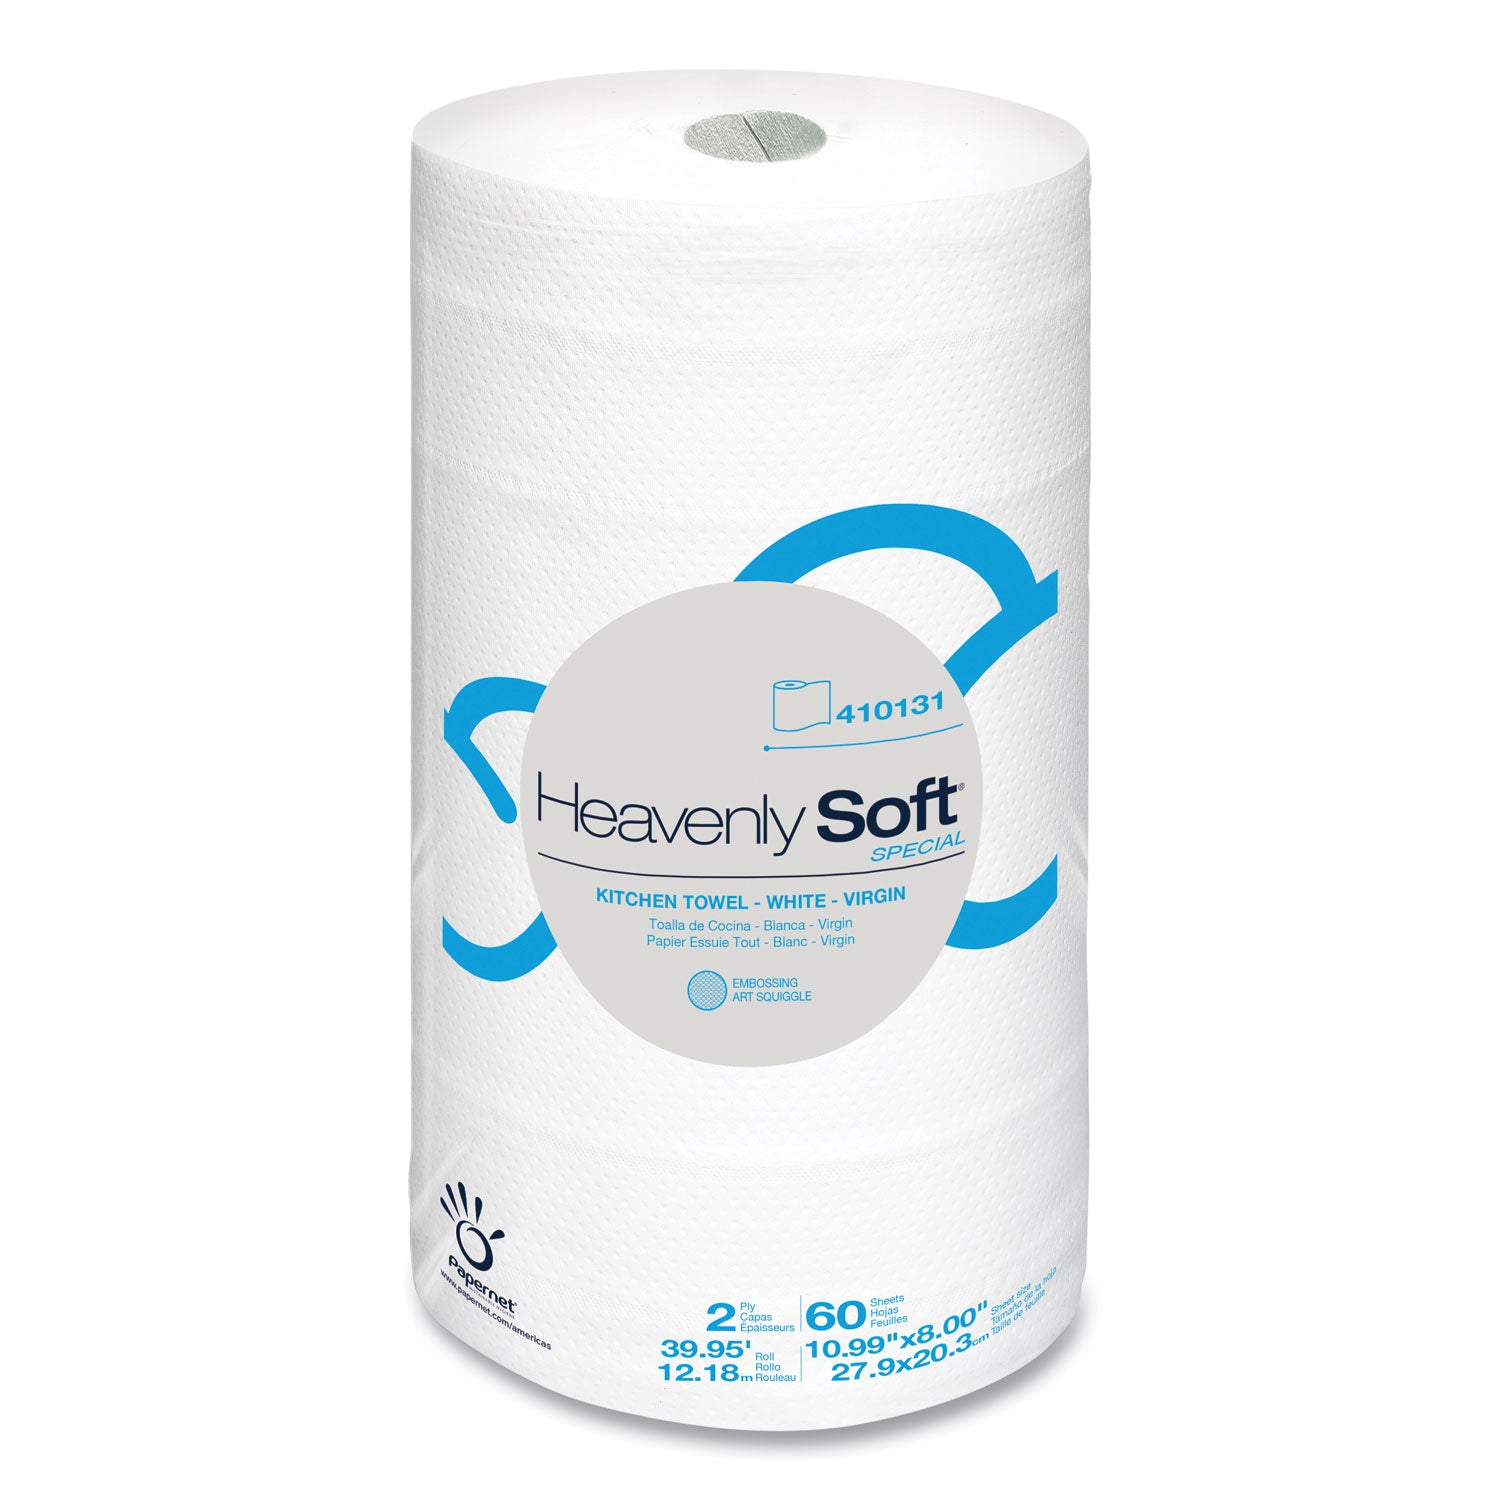 heavenly-soft-kitchen-paper-towel-special-2-ply-8-x-11-white-60-roll-30-rolls-carton_sod410131 - 1